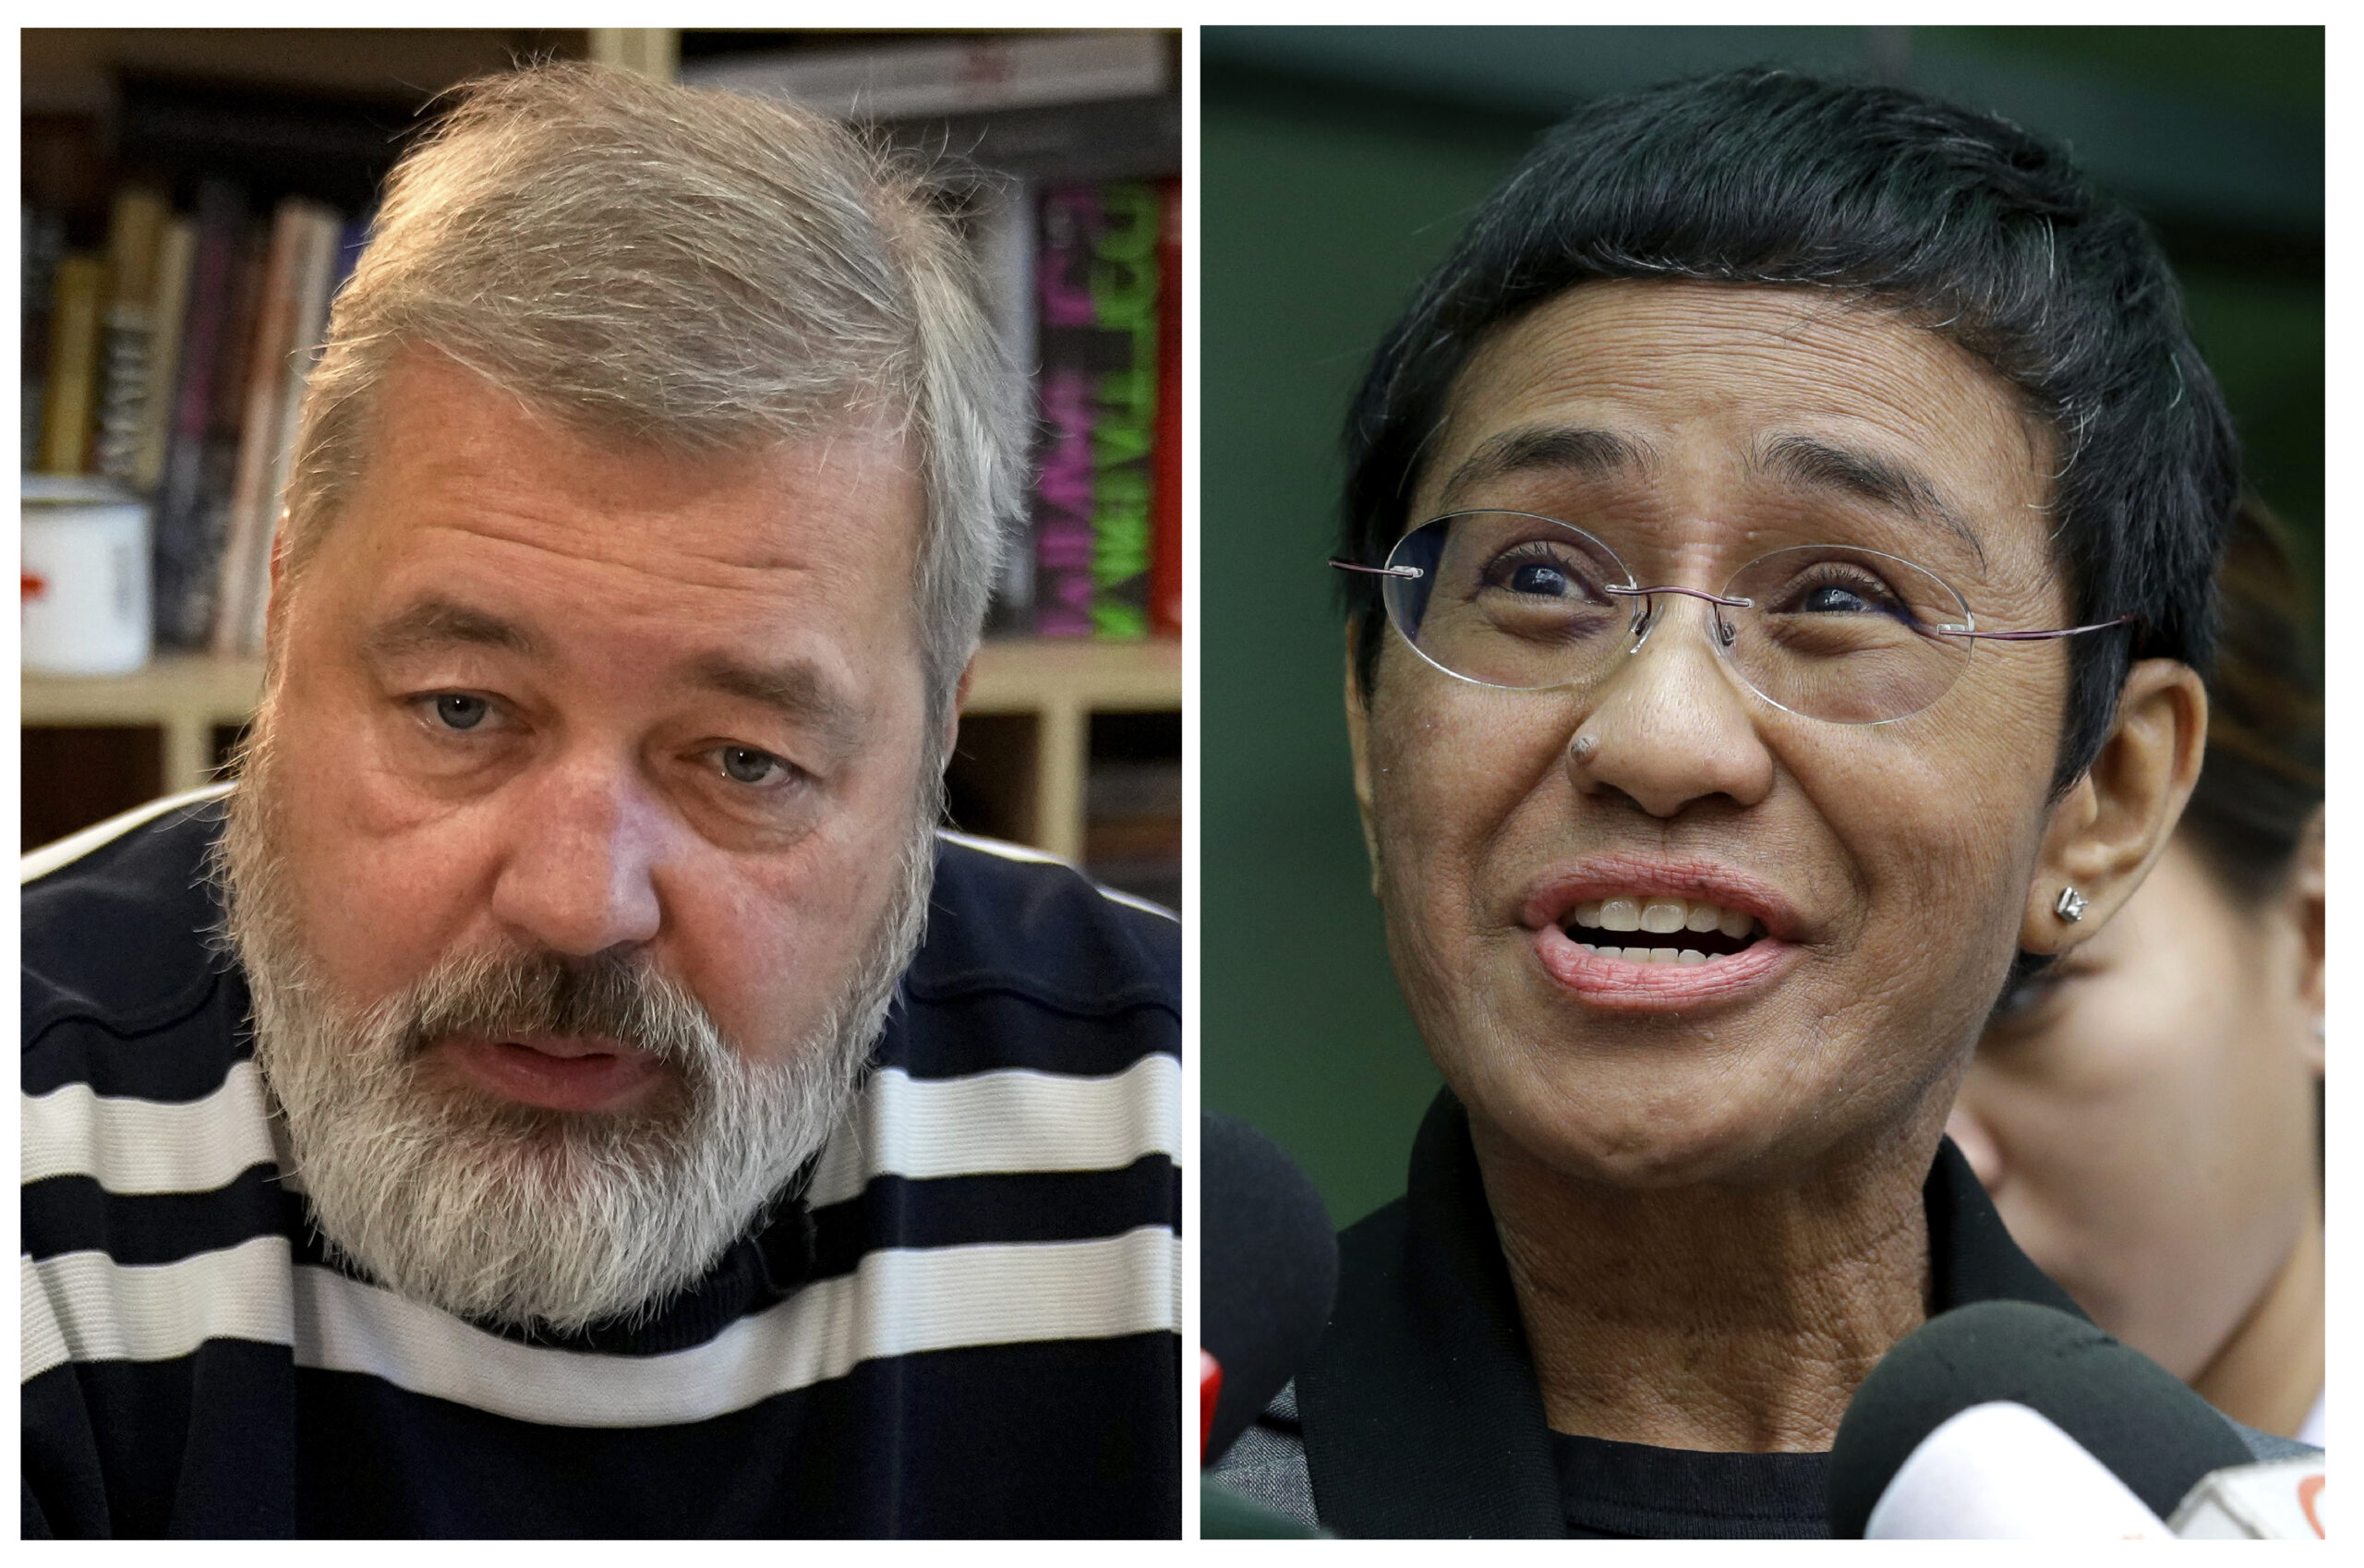 FILE - A combo of file images of Novaya Gazeta editor Dmitry Muratov, left, and of Rappler CEO and Executive Editor Maria Ressa. On Friday, Oct. 8, 2021 the Nobel Peace Prize was awarded to journalists Maria Ressa of the Philippines and Dmitry Muratov of Russia for their fight for freedom of expression. (AP Photo/Alexander Zemlianichenko and Aaron Favila, File)